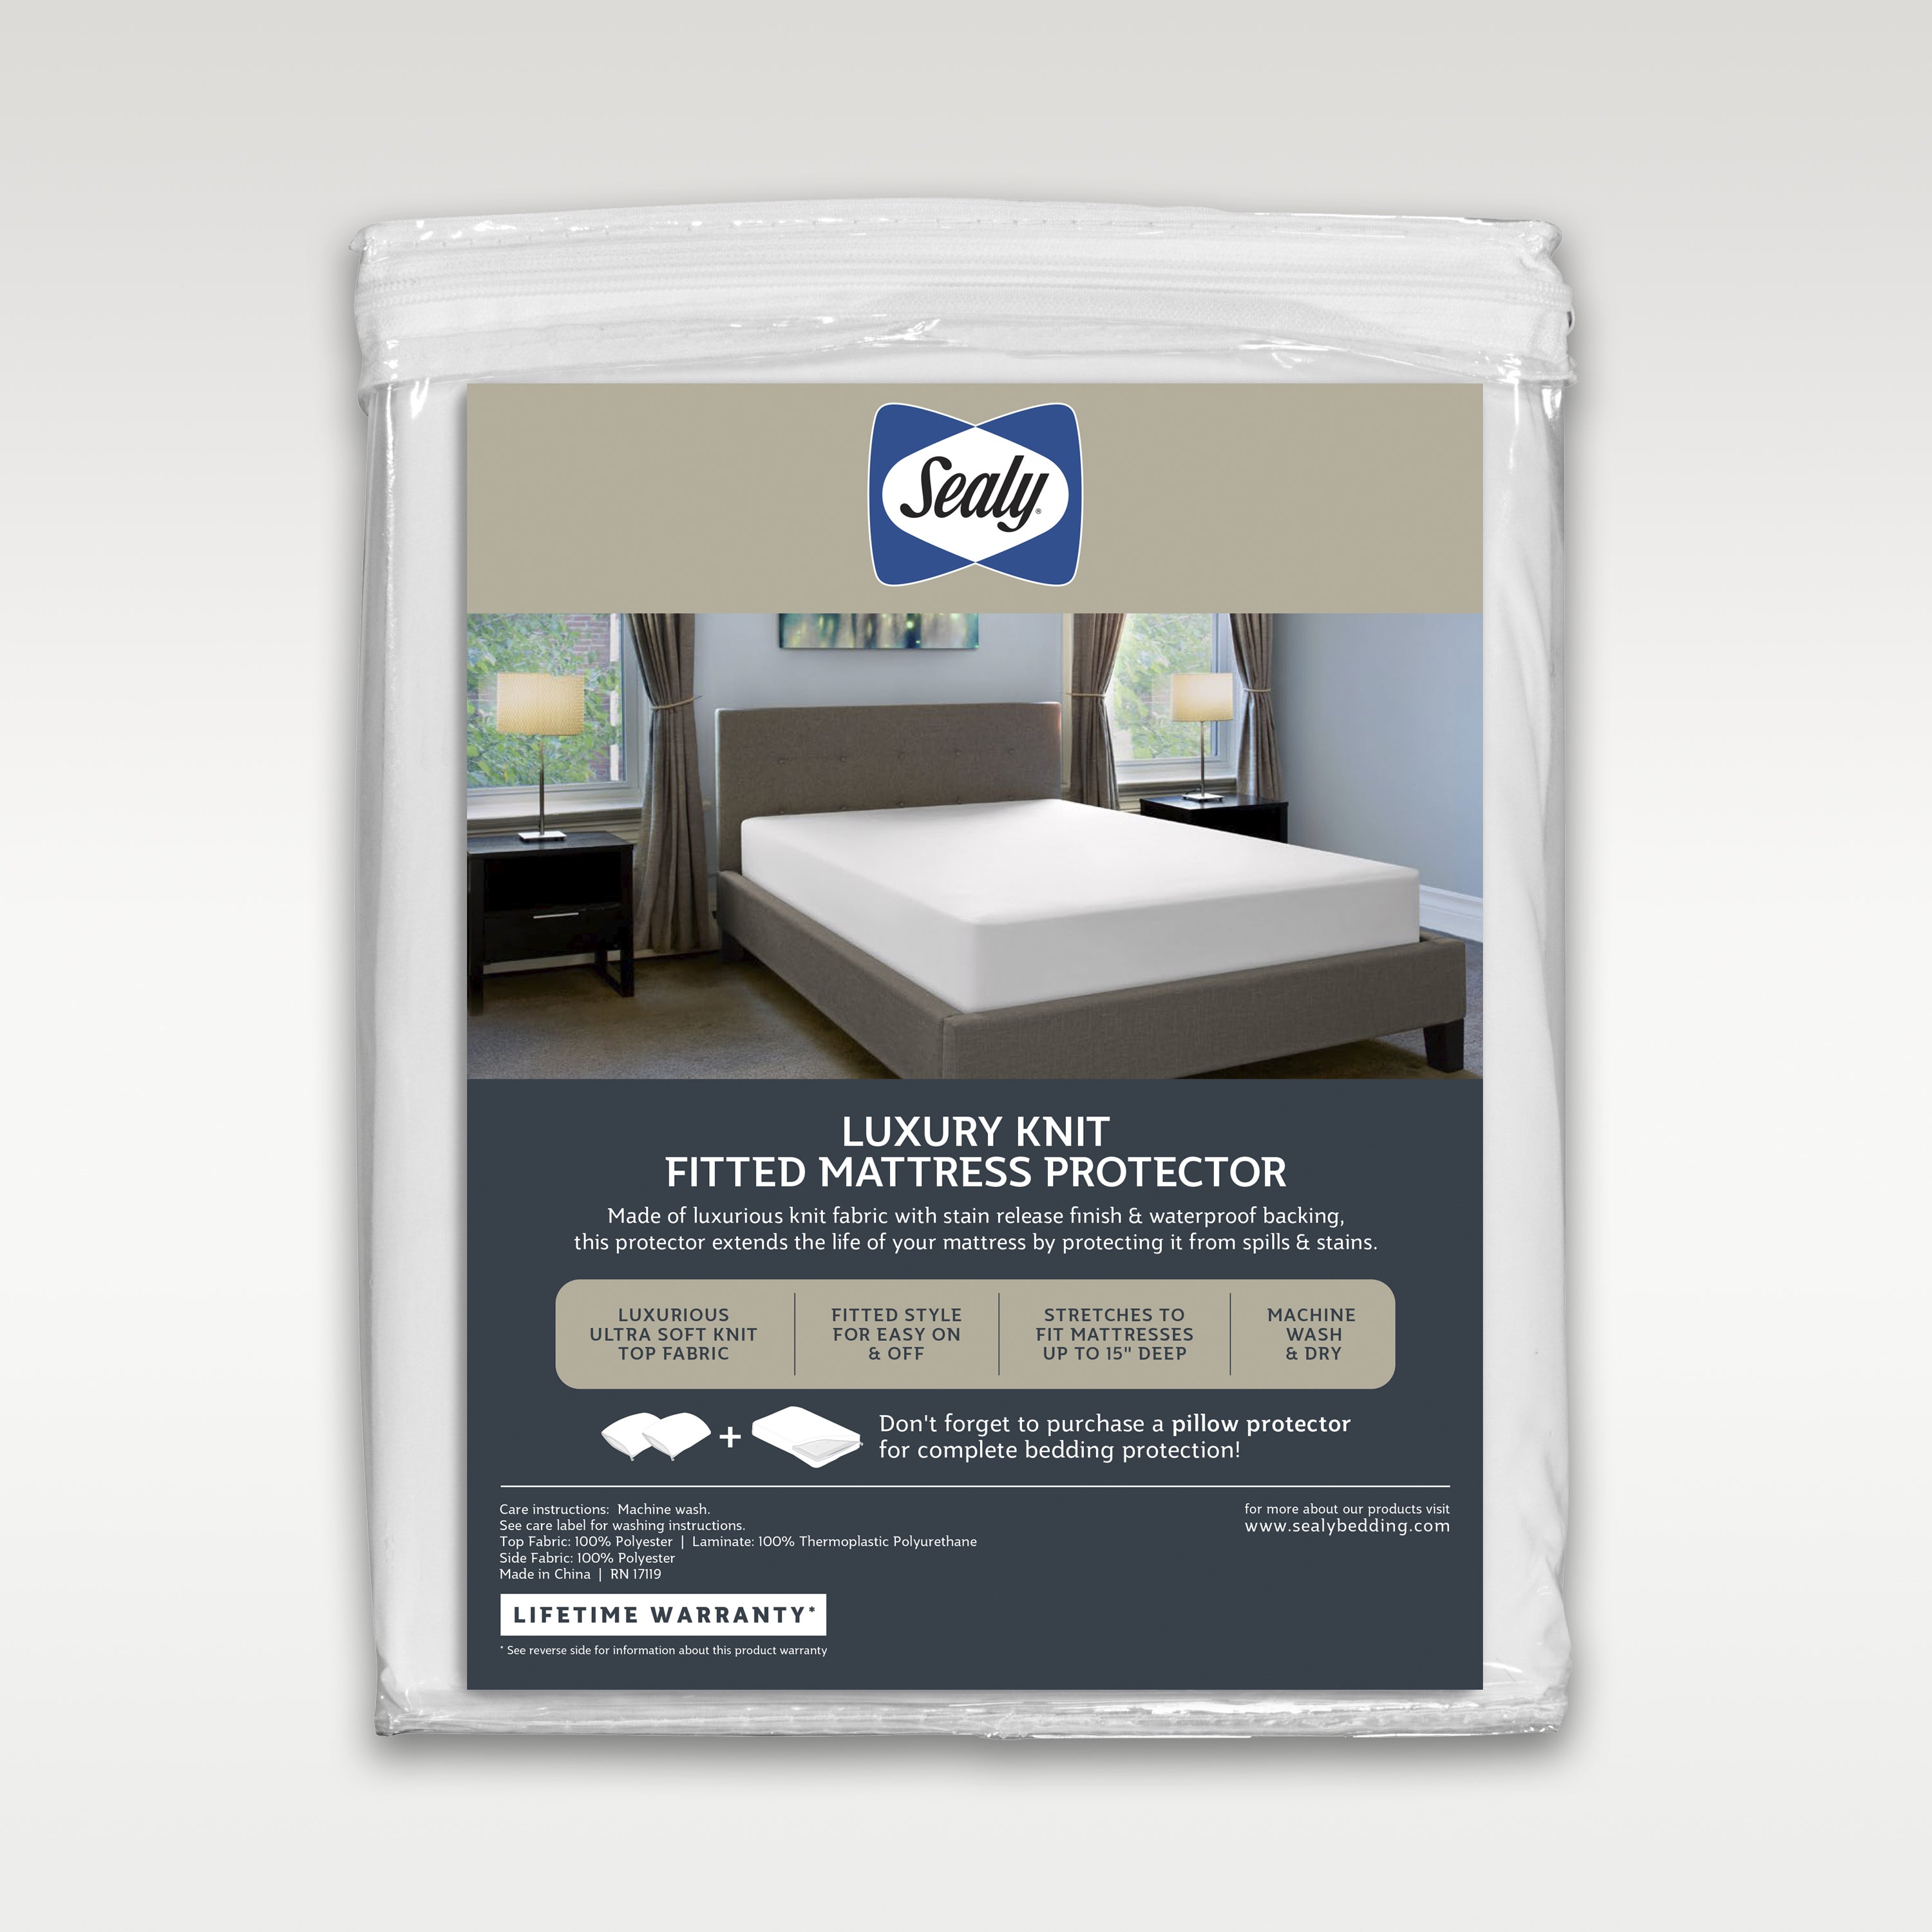 How to Wash and Care for a Mattress Protector